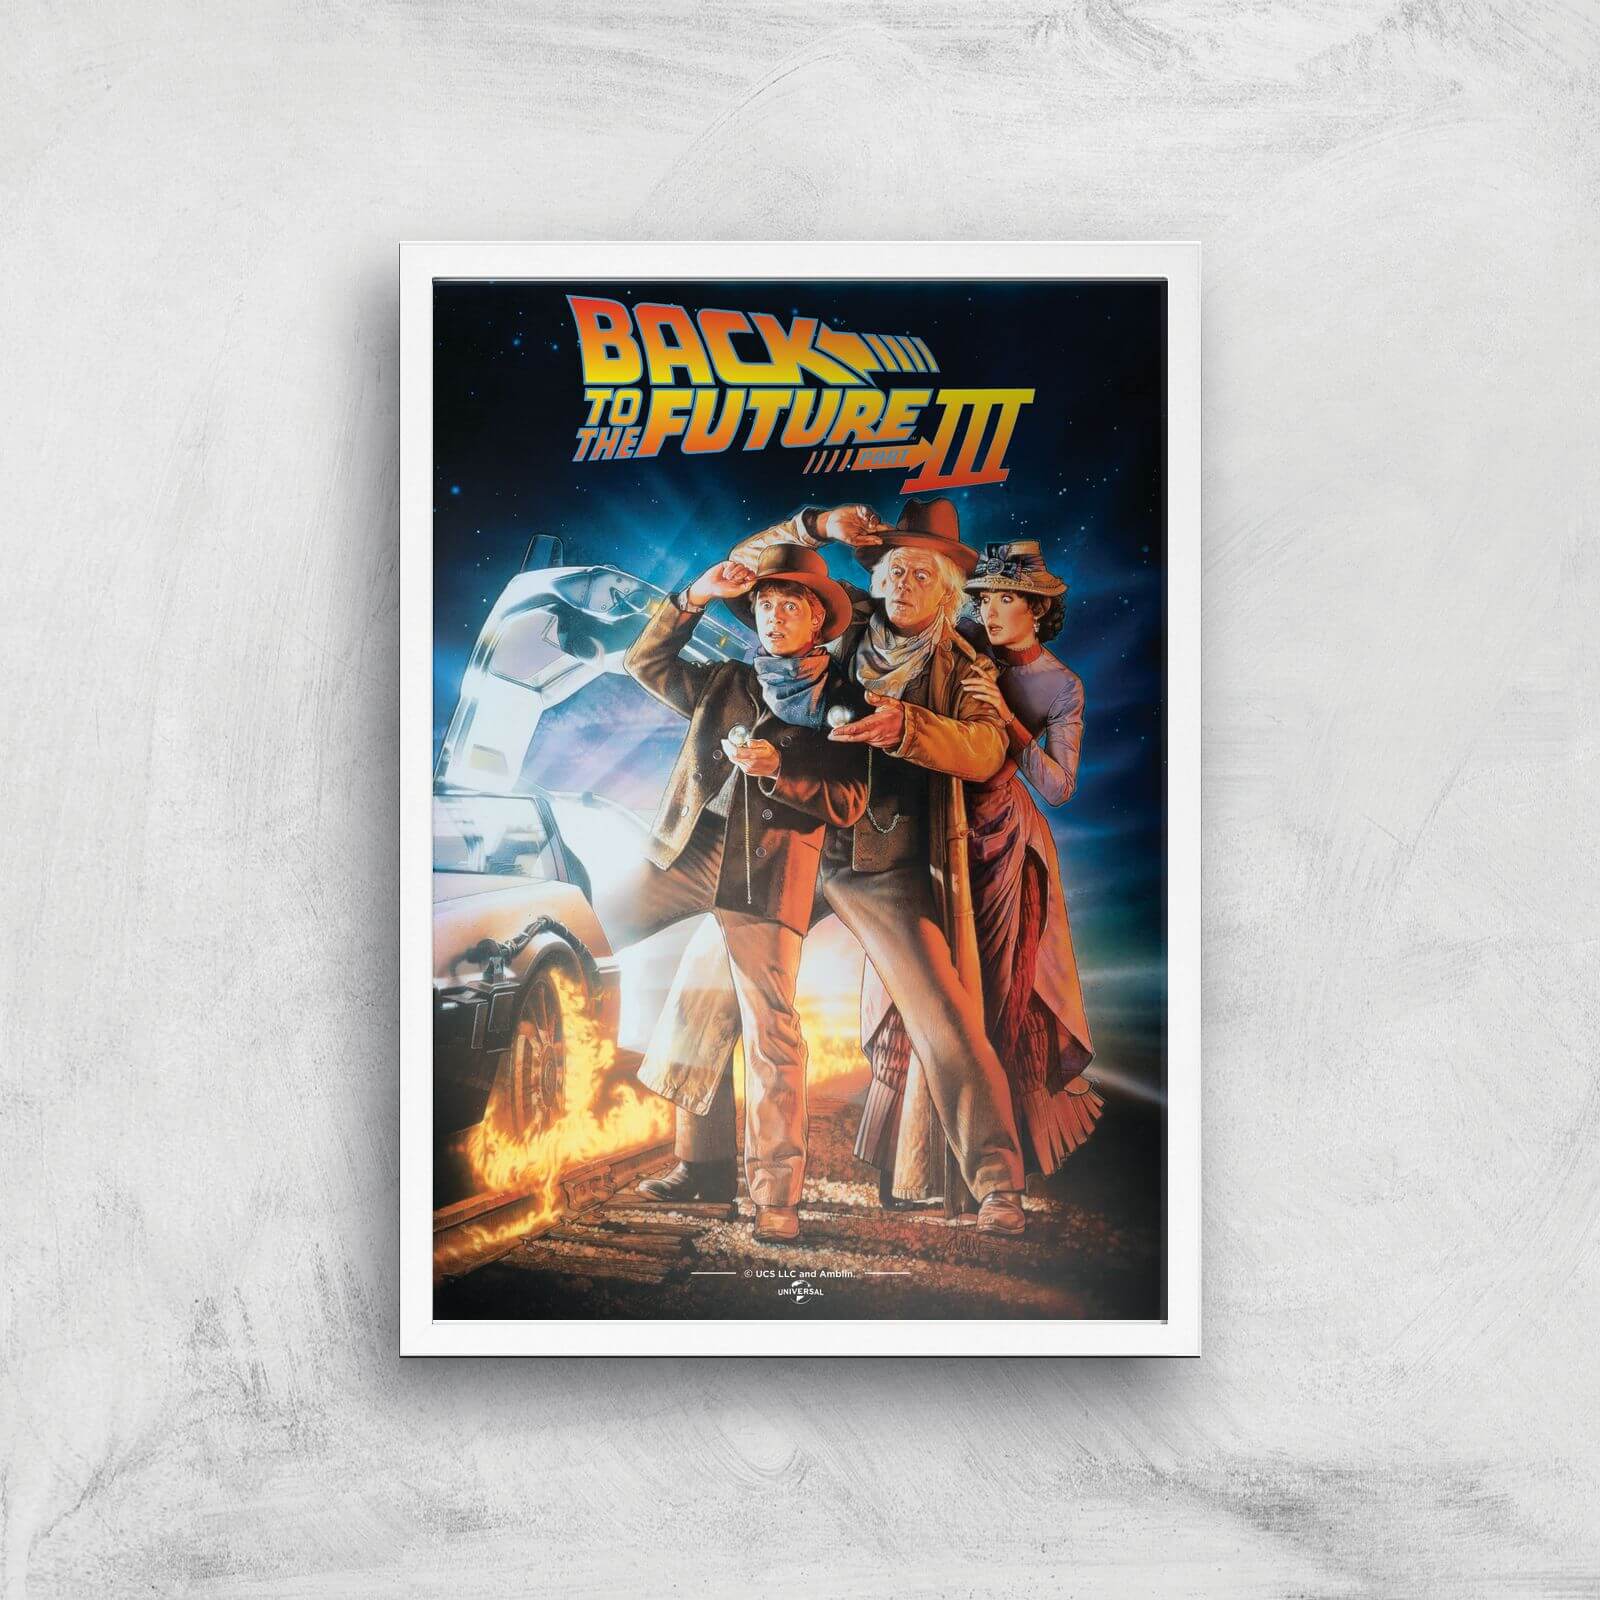 Back To The Future Part 3 Giclee Art Print - A2 - White Frame